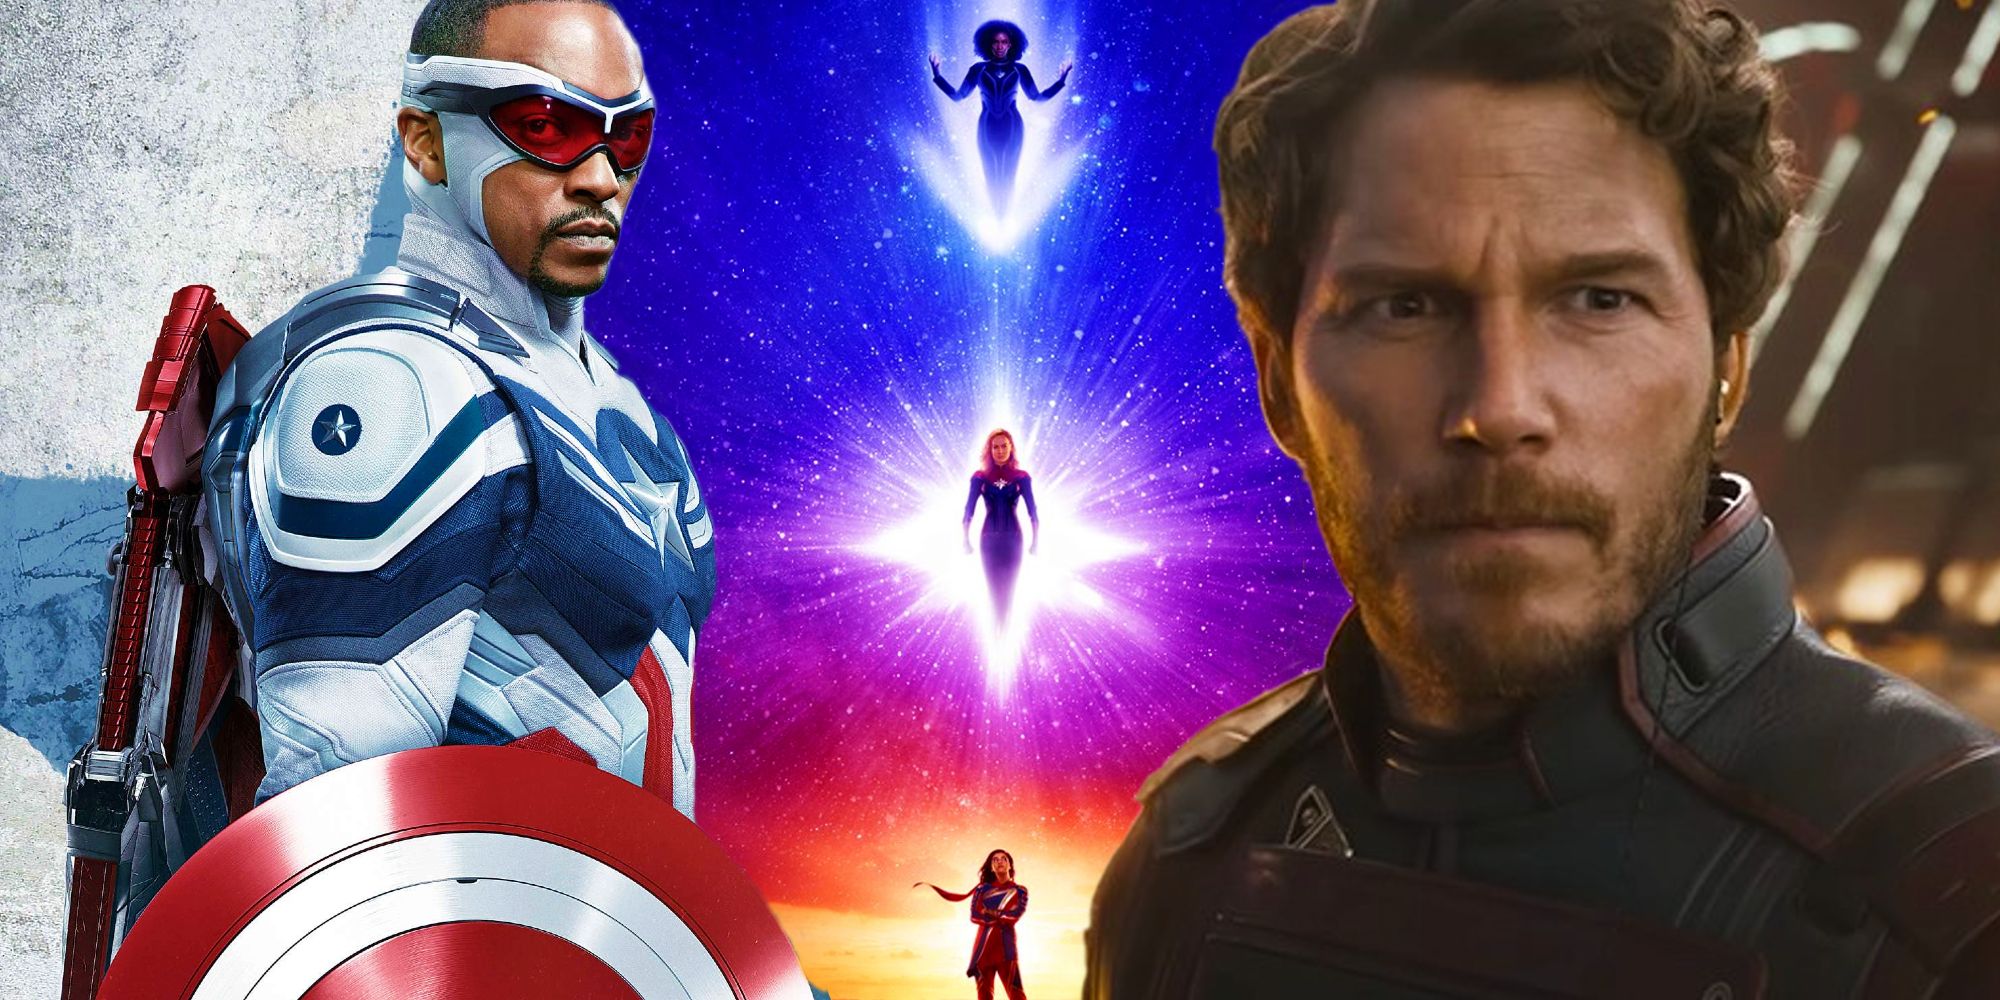 Marvel teaser poster between Sam Wilson as Captain America and Peter Quill/Starlord from Guardians 3